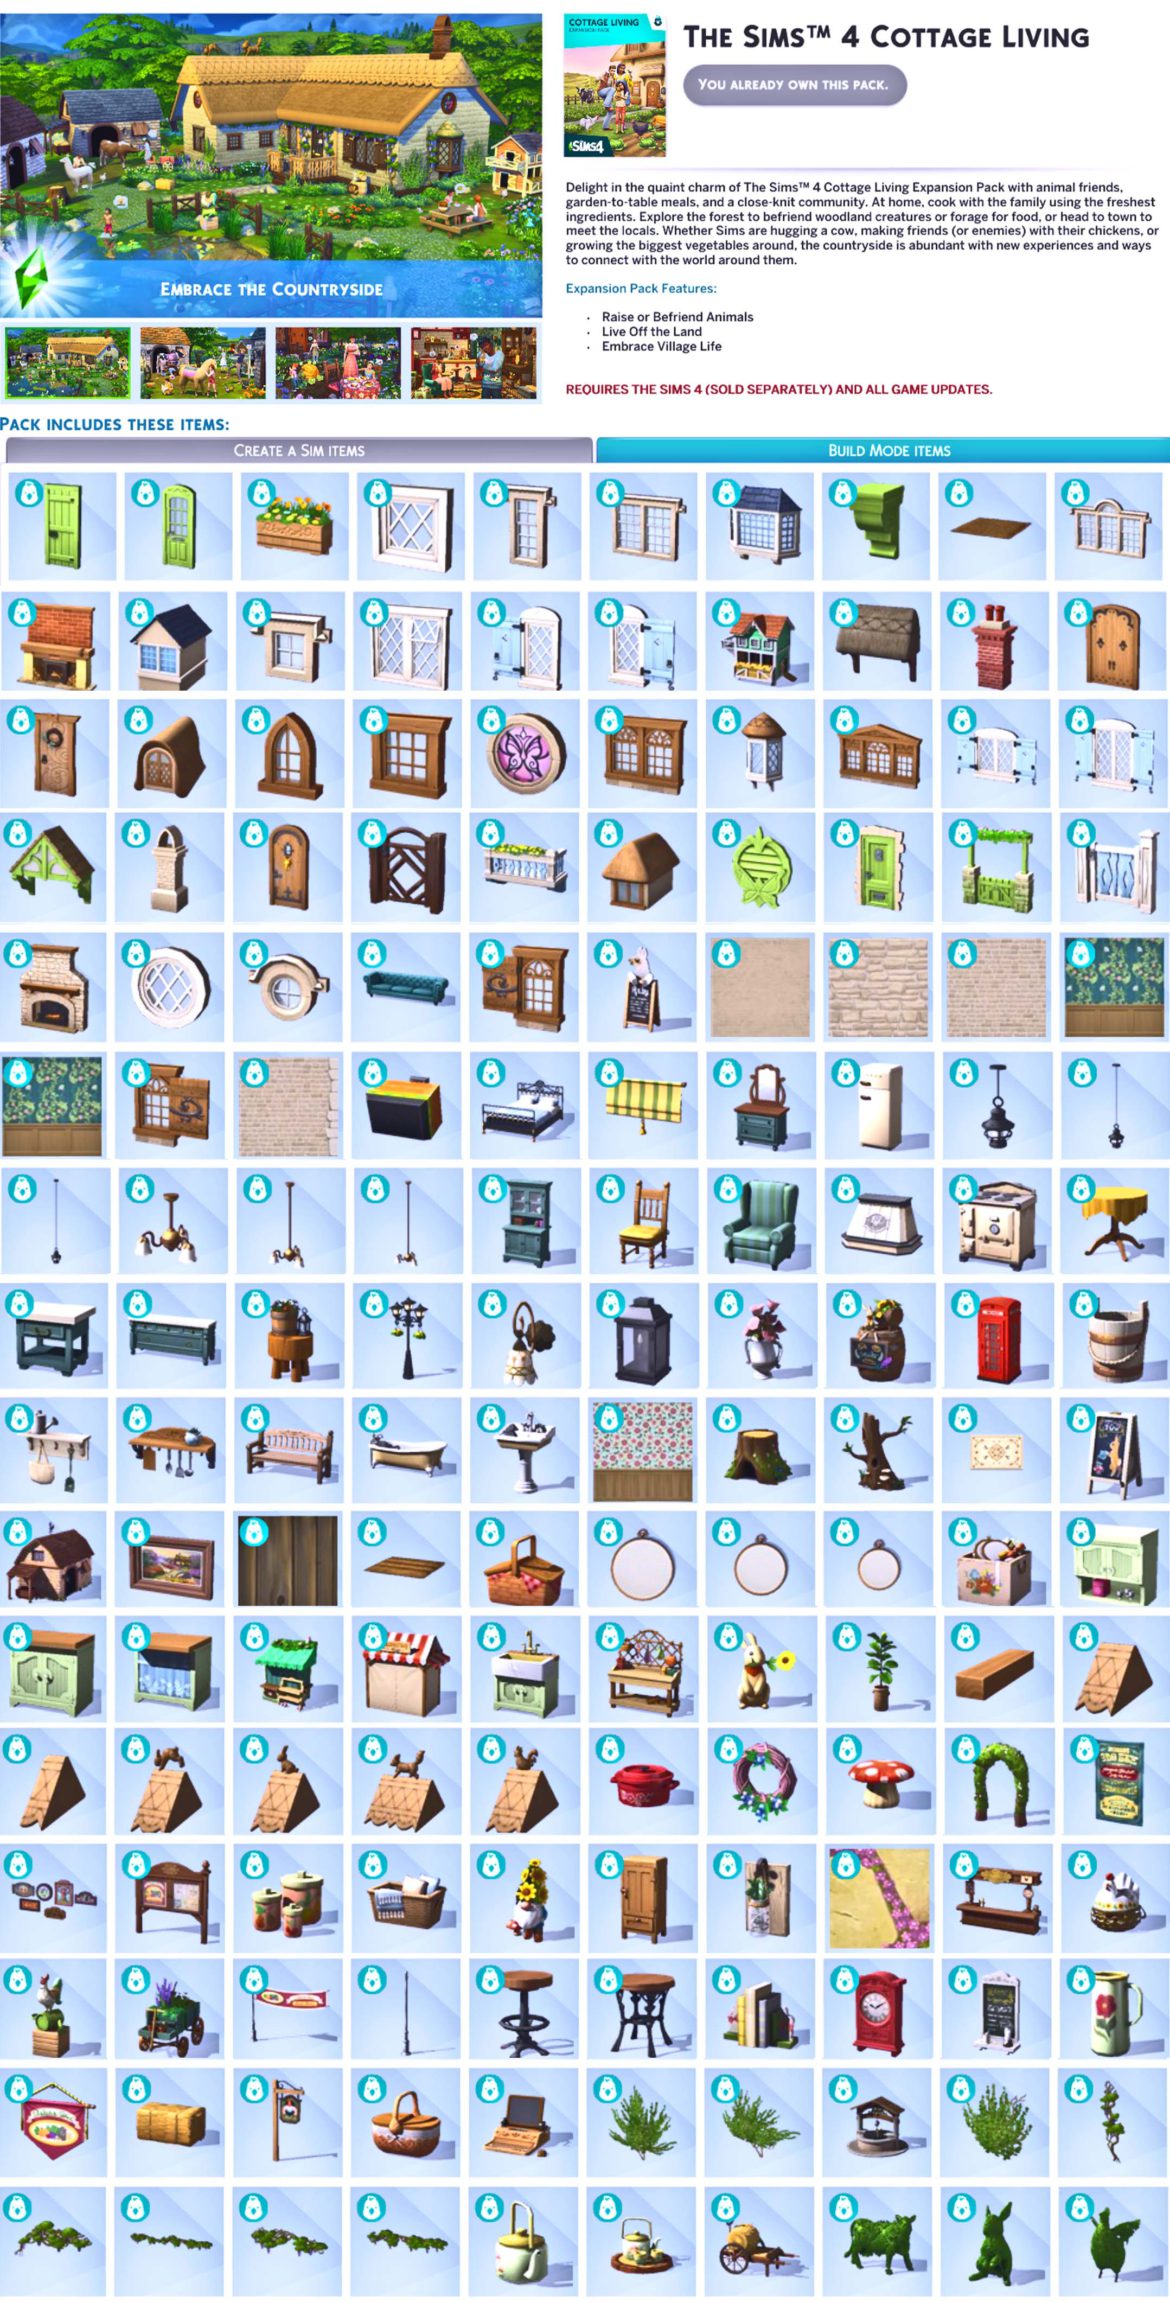 the-sims-4-cottage-living-build-mode-items-micat-game